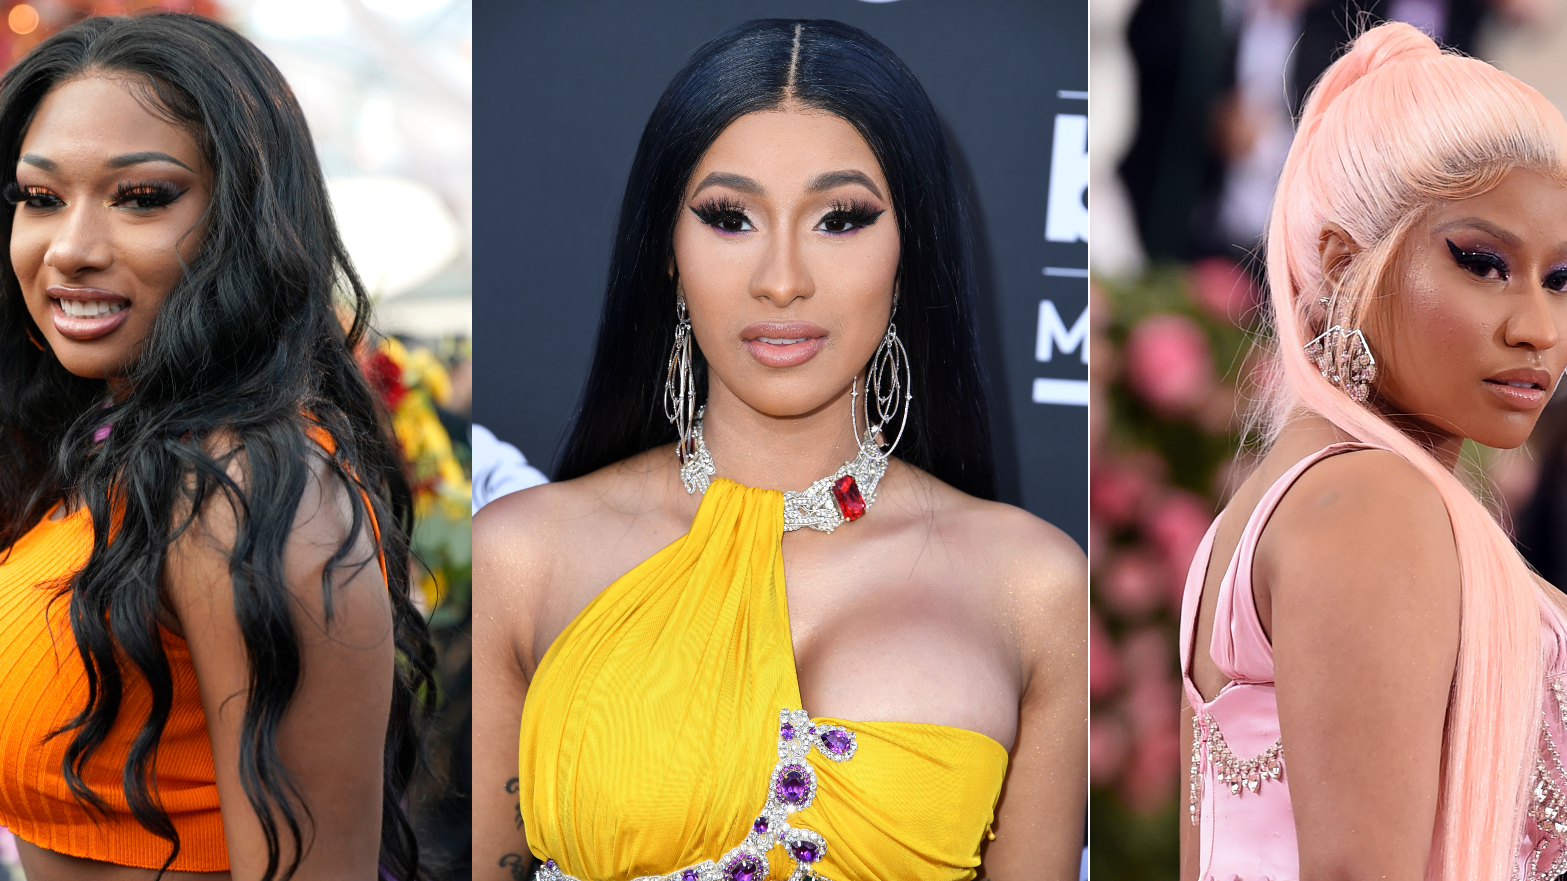 Megan Thee Stallion Wants the Industry to Stop Pitting Her Against Cardi B and Nicki Minaj